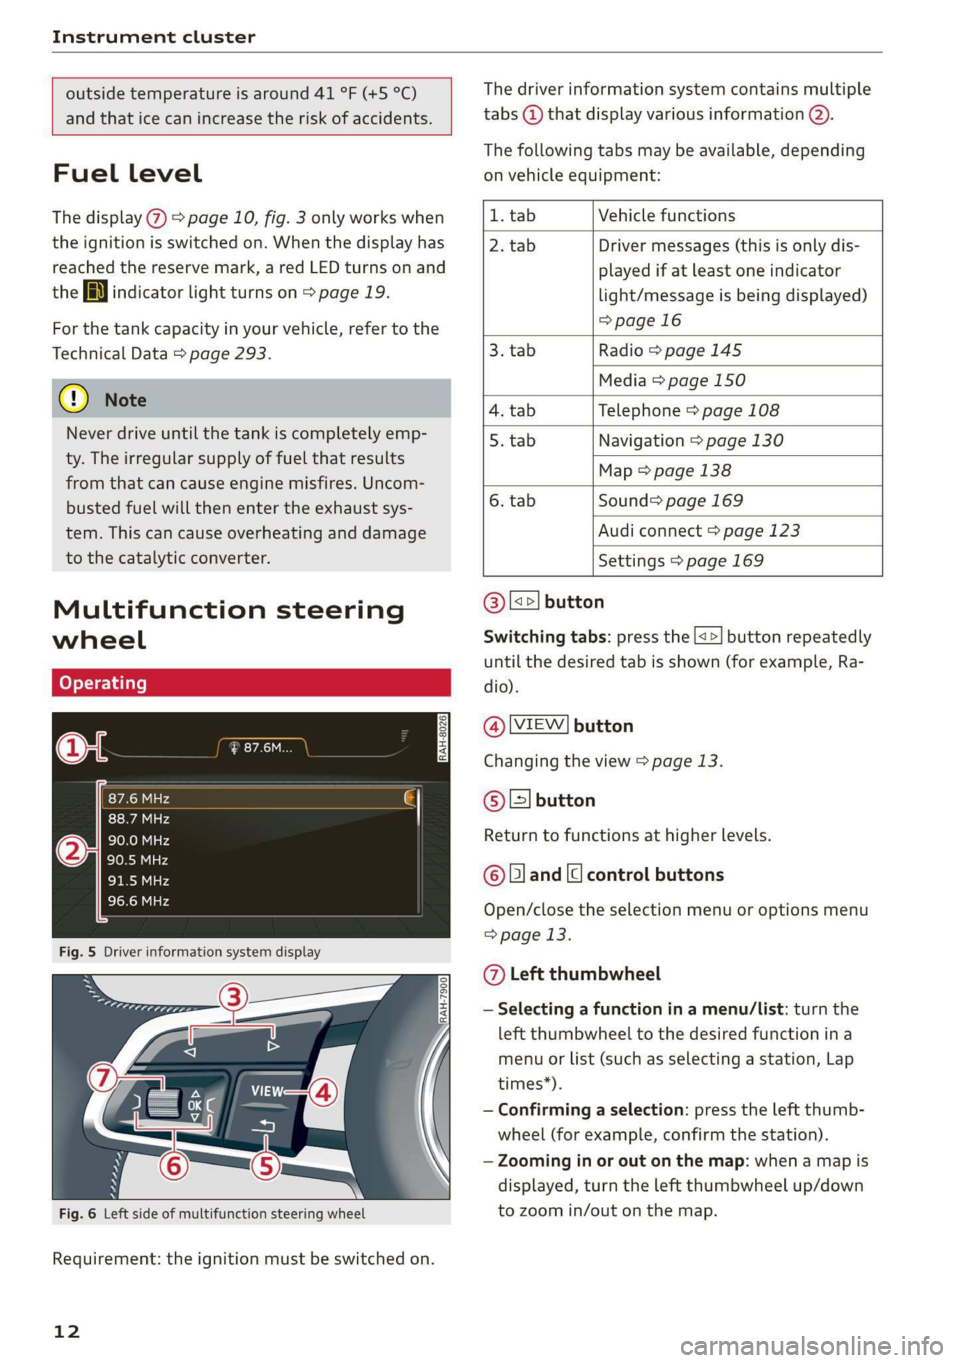 AUDI TT COUPE 2019  Owners Manual Instrumentcluster
 
 
outsidetemperatureisaround41°F(+5°C)
andthaticecanincreasetheriskofaccidents.
 
  
Fuellevel
Thedisplay@>page10,fig.3onlyworkswhen
theignitionisswitchedon.Whenthedisplayhas
rea